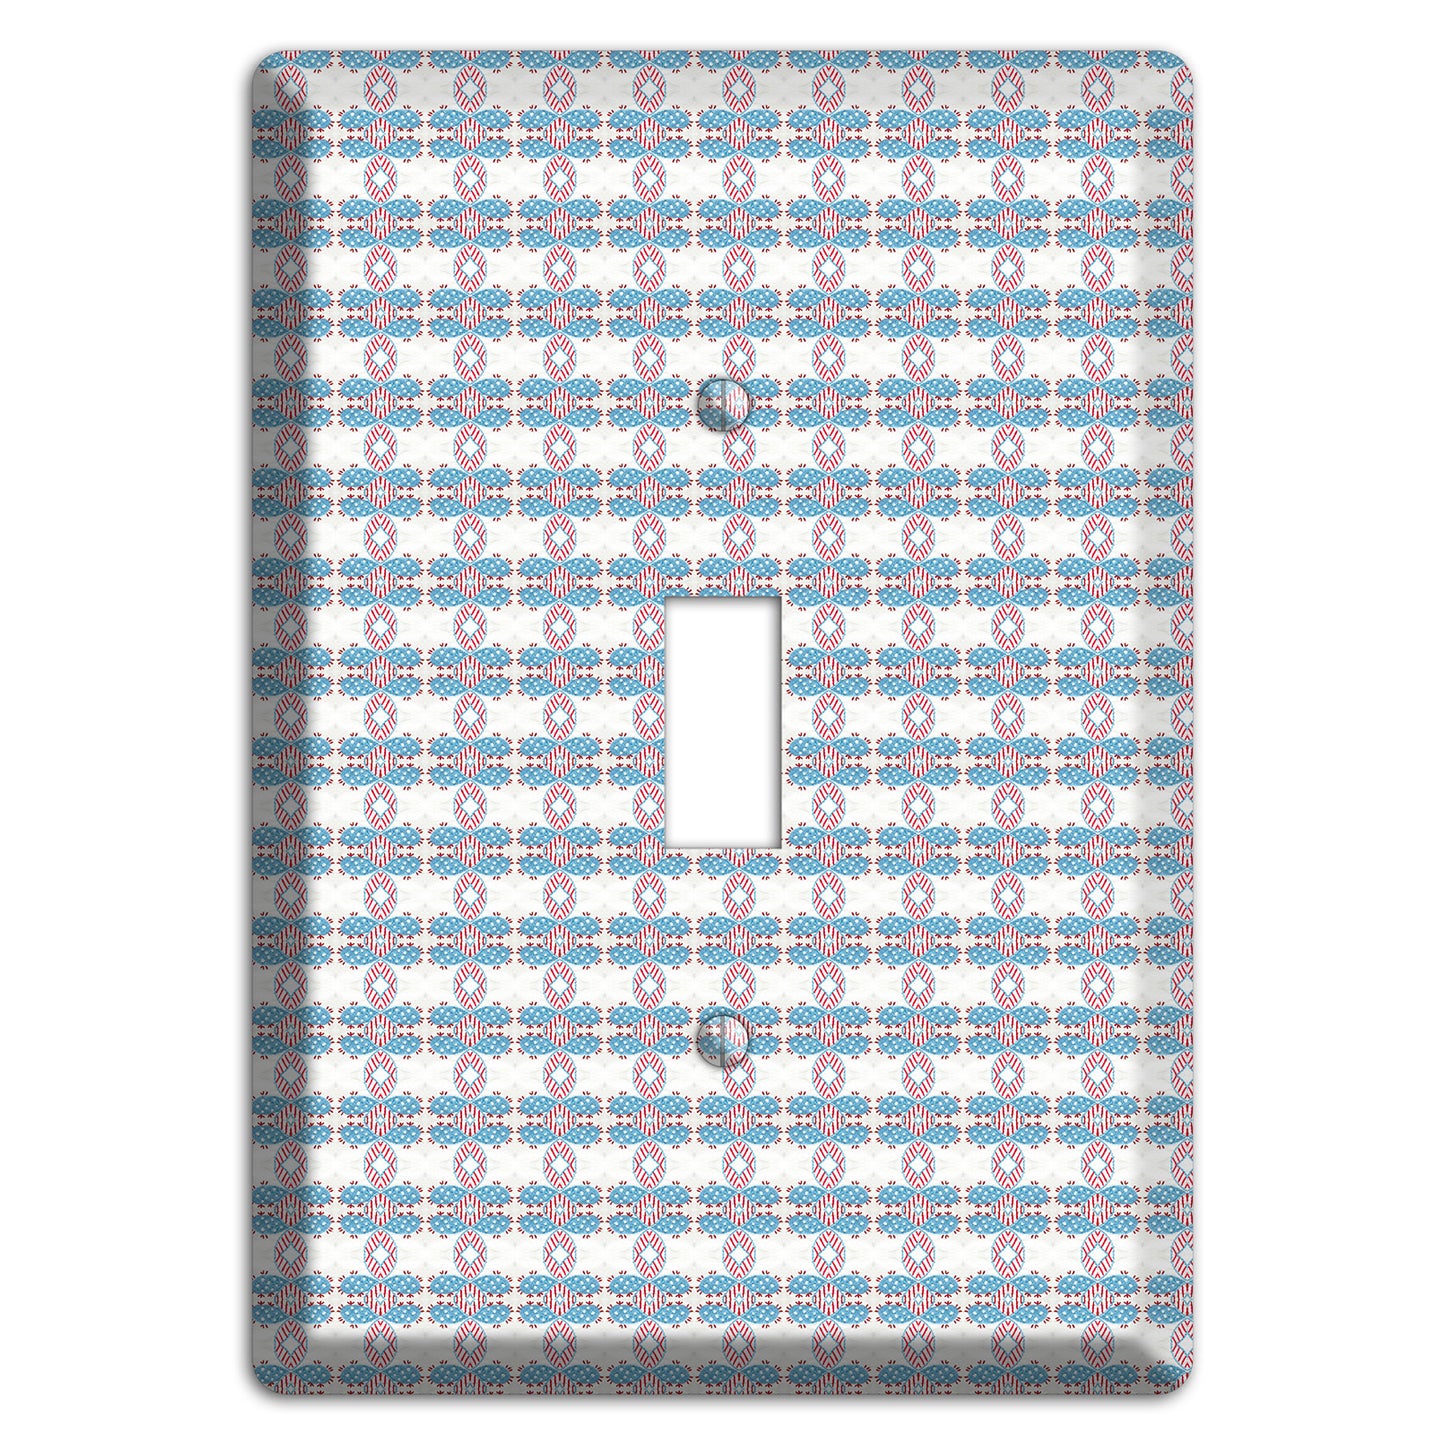 White with Faded Blue and Red Tapestry Cover Plates